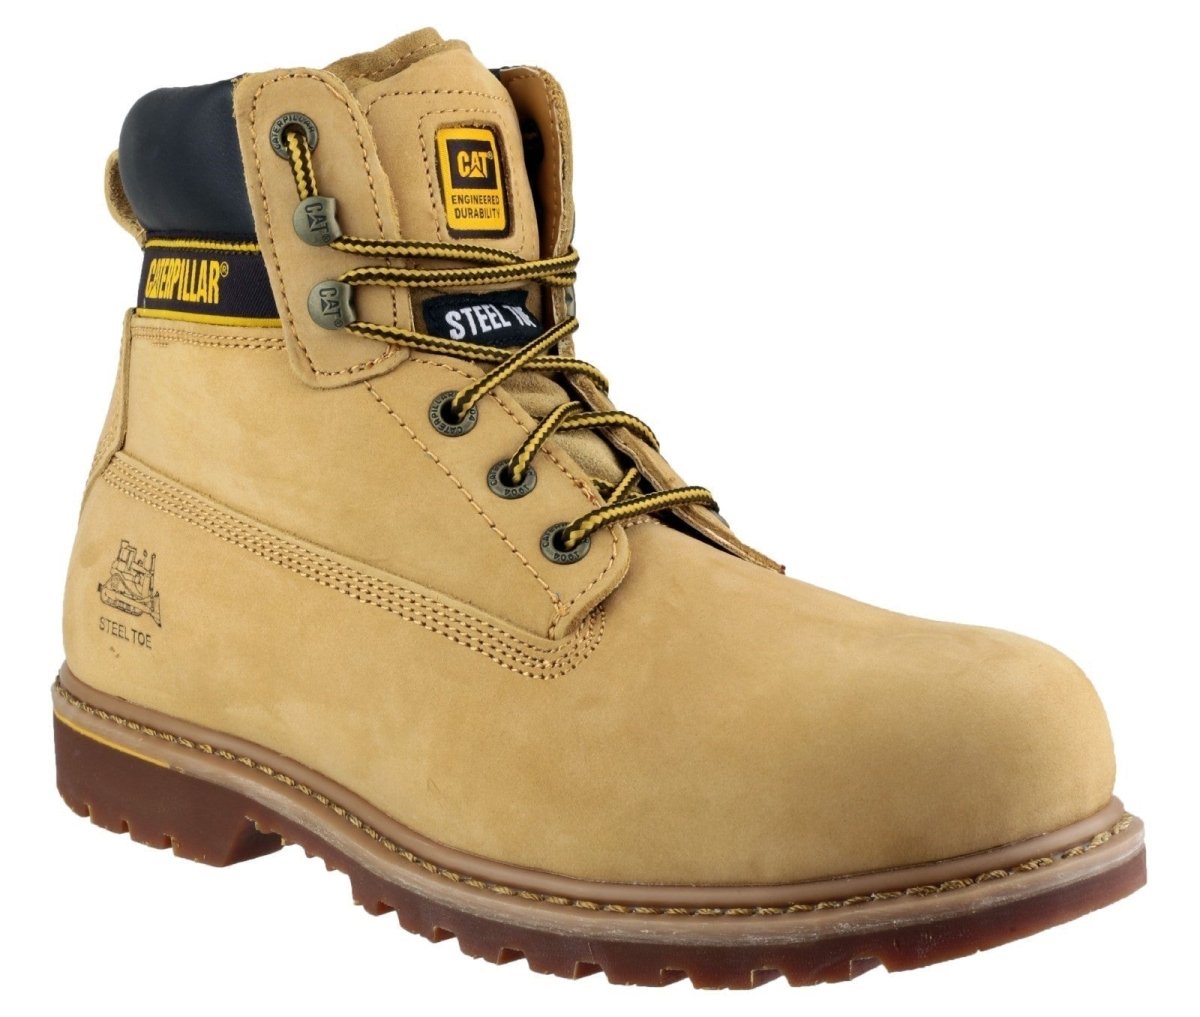 Caterpillar Holton S3 Goodyear Welted Safety Boots - Shoe Store Direct